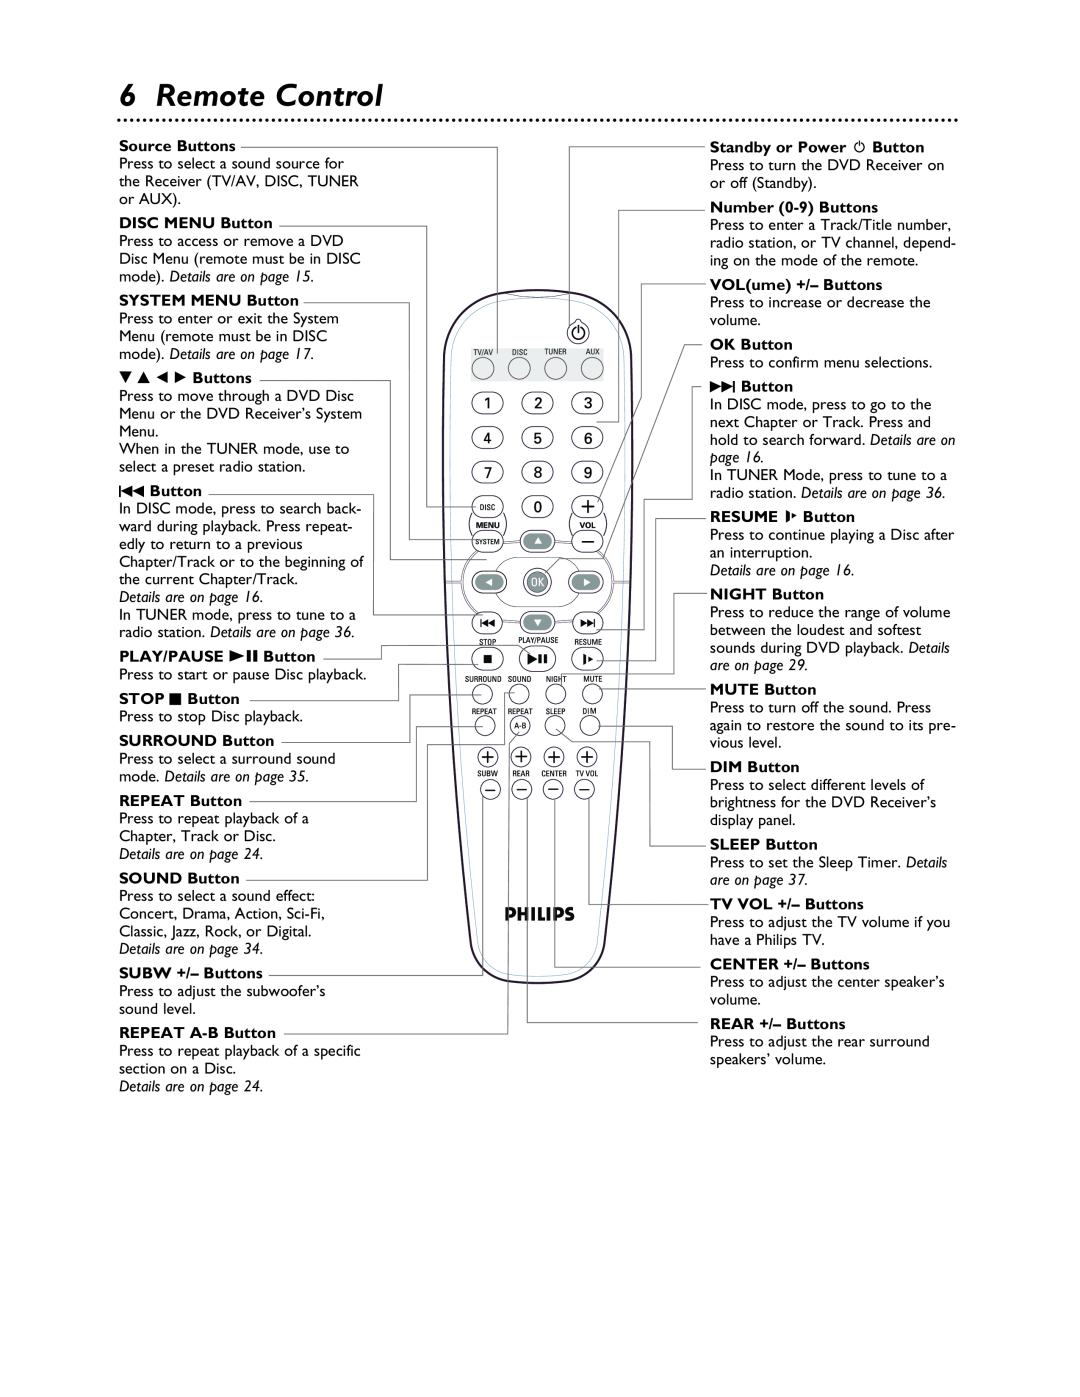 Philips LX3000 Remote Control, Source Buttons, DISC MENU Button, H Button, Details are on page, PLAY/PAUSE 38 Button 